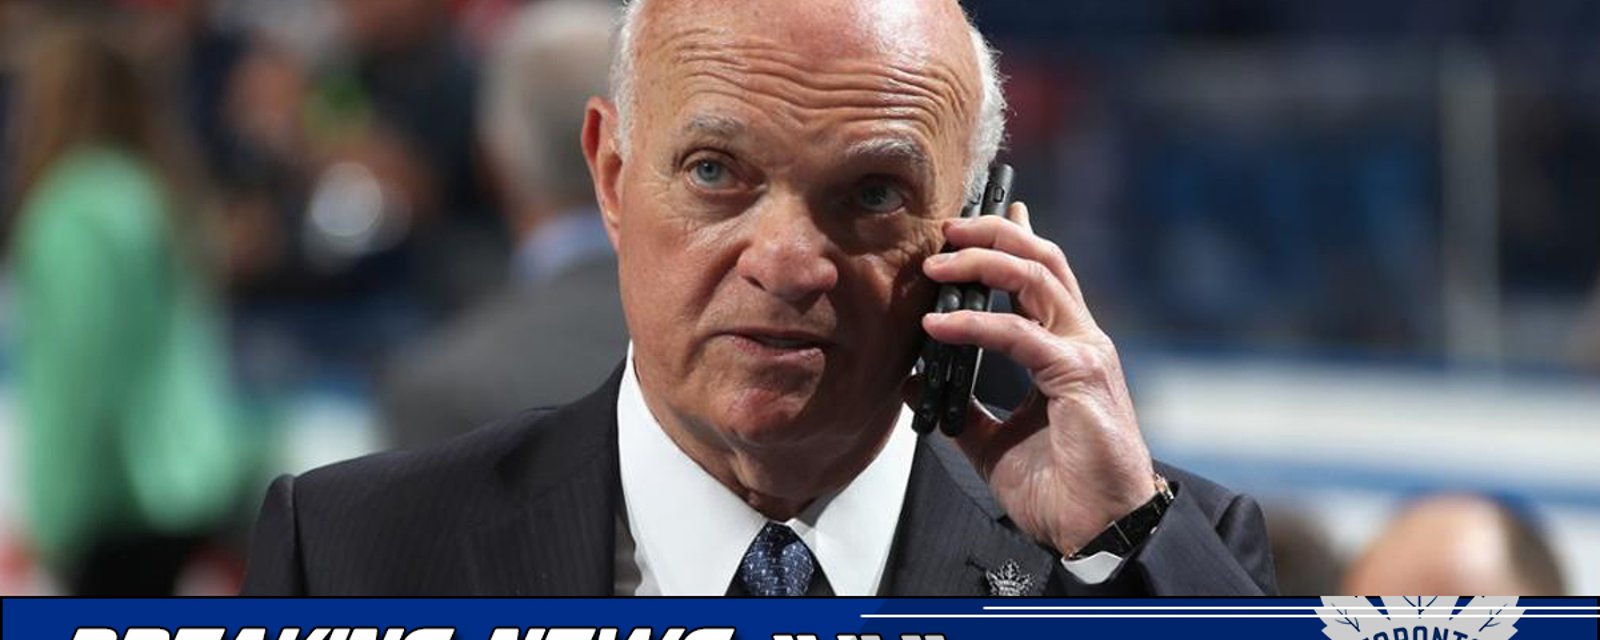 Breaking: Maple Leafs GM hints at potential captaincy for next season.